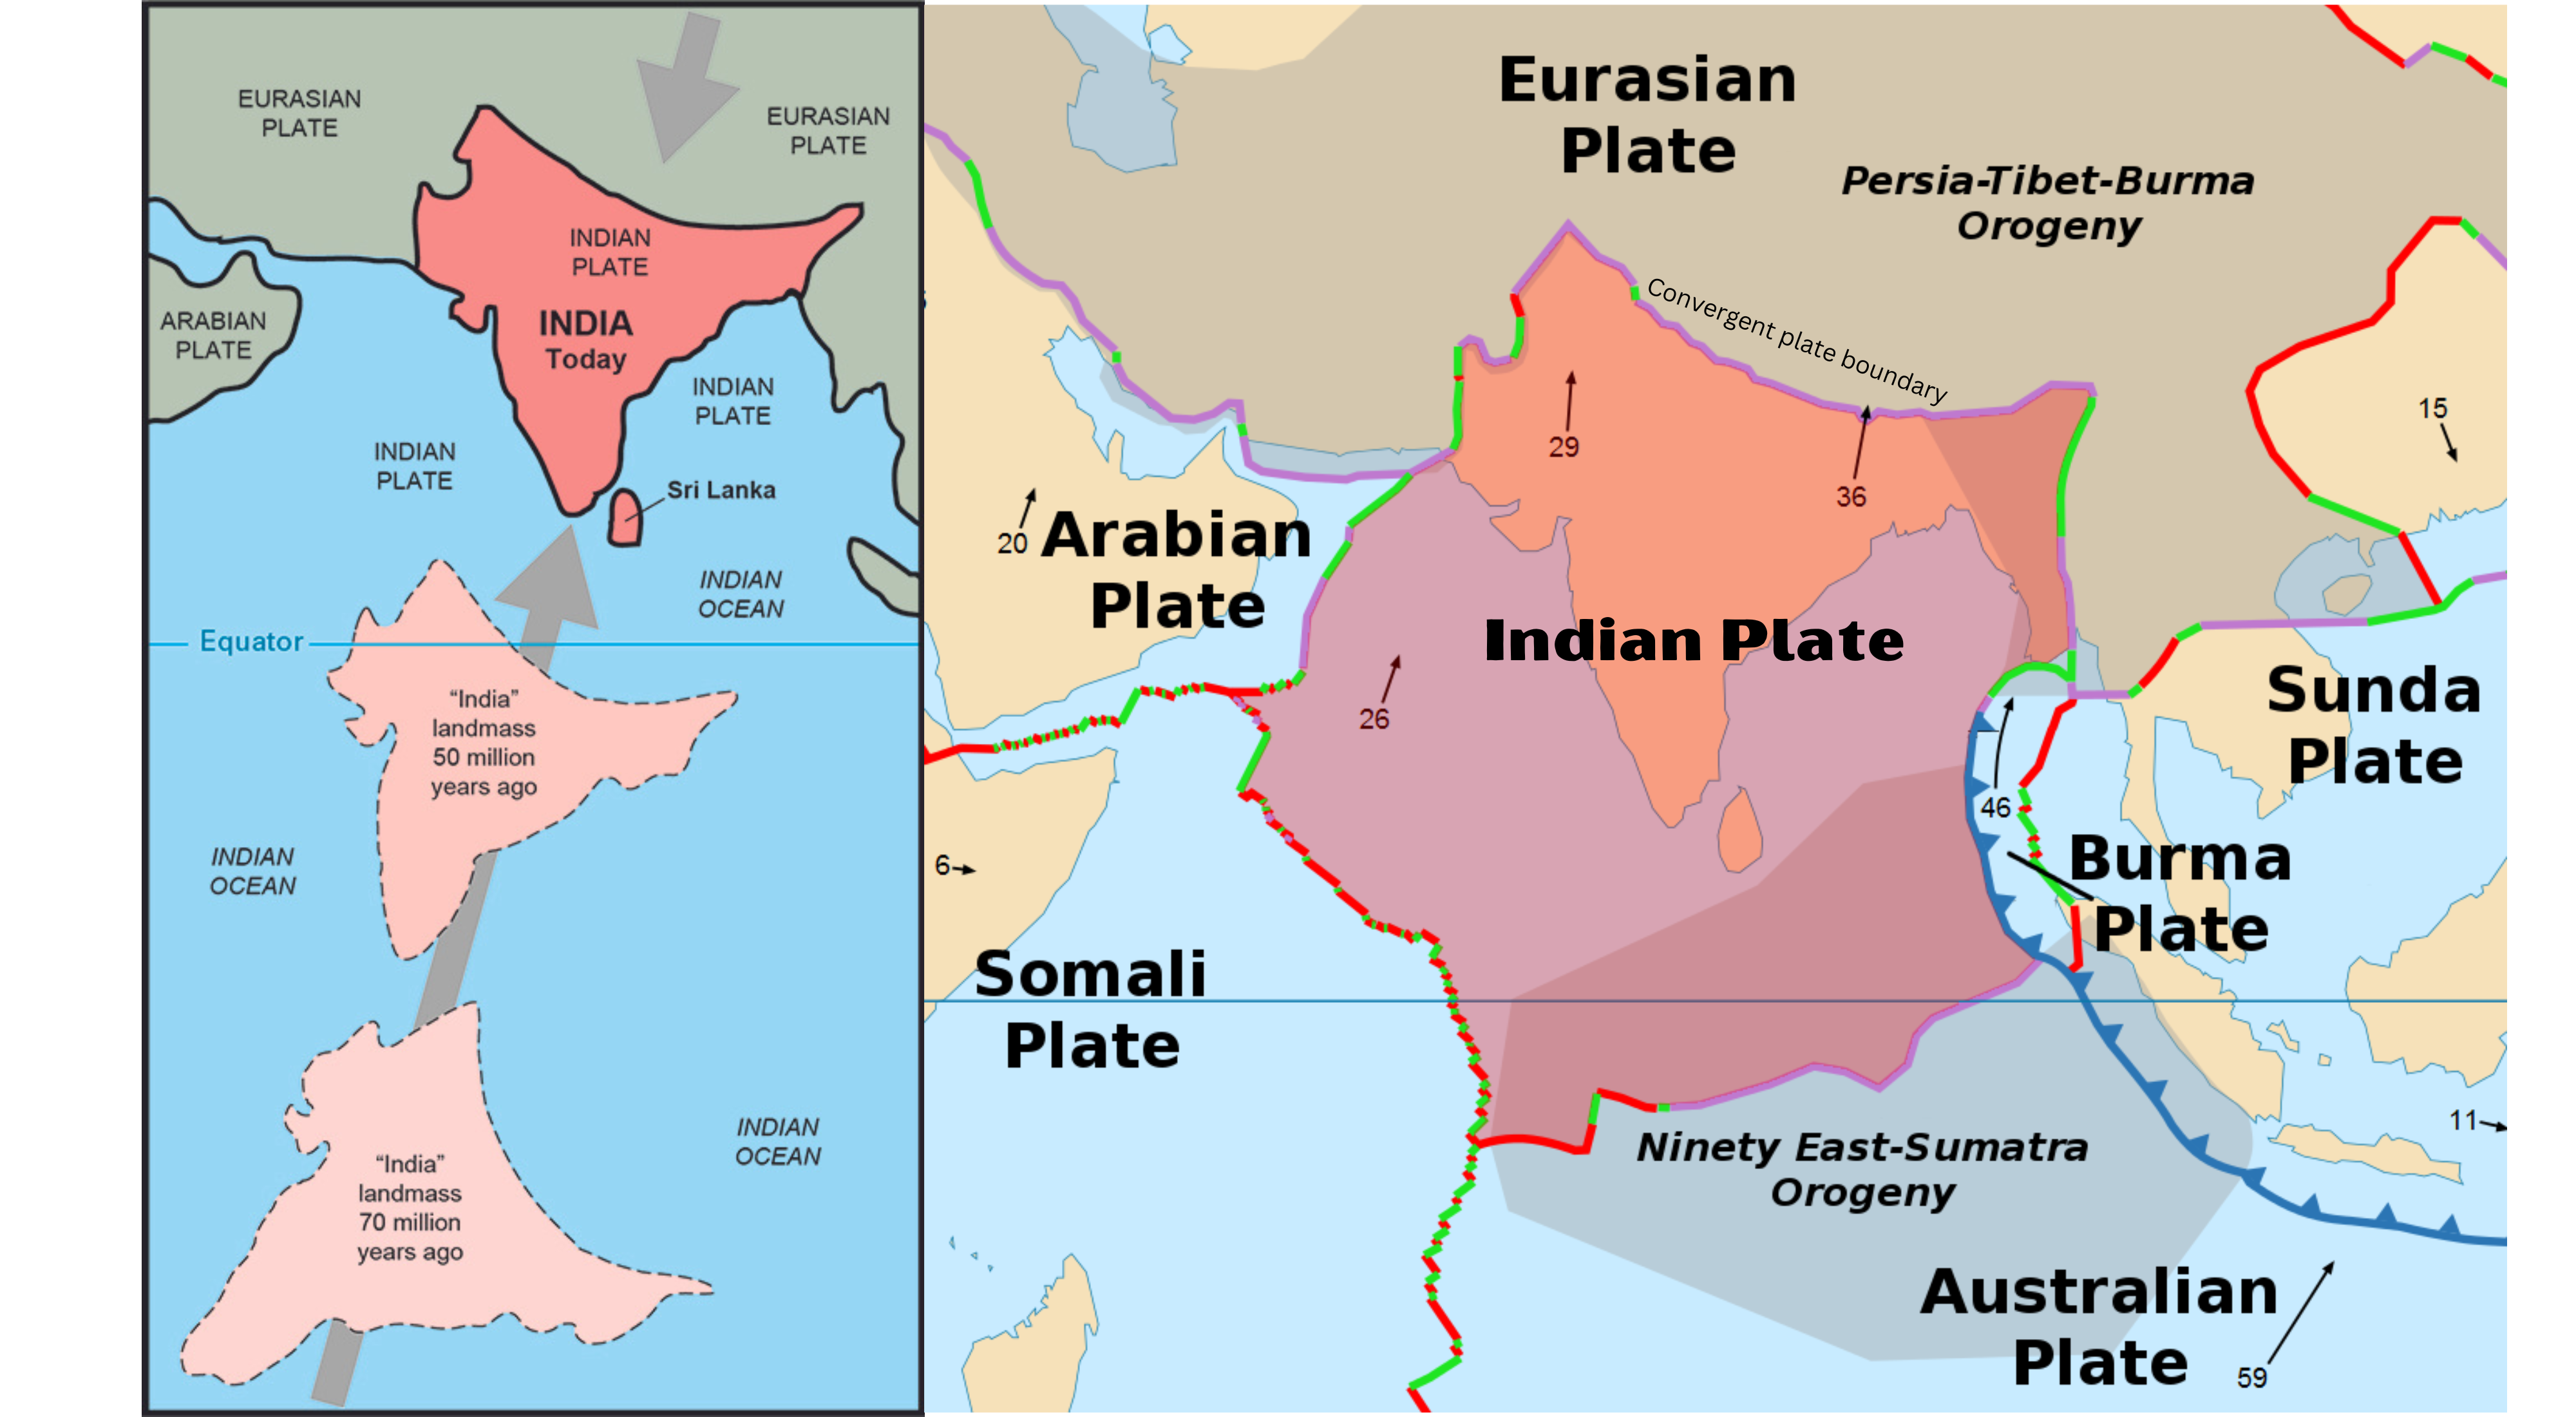 “India” landmass 70 million years ago in the Indian Ocean moves north to converge on the Eurasian plate